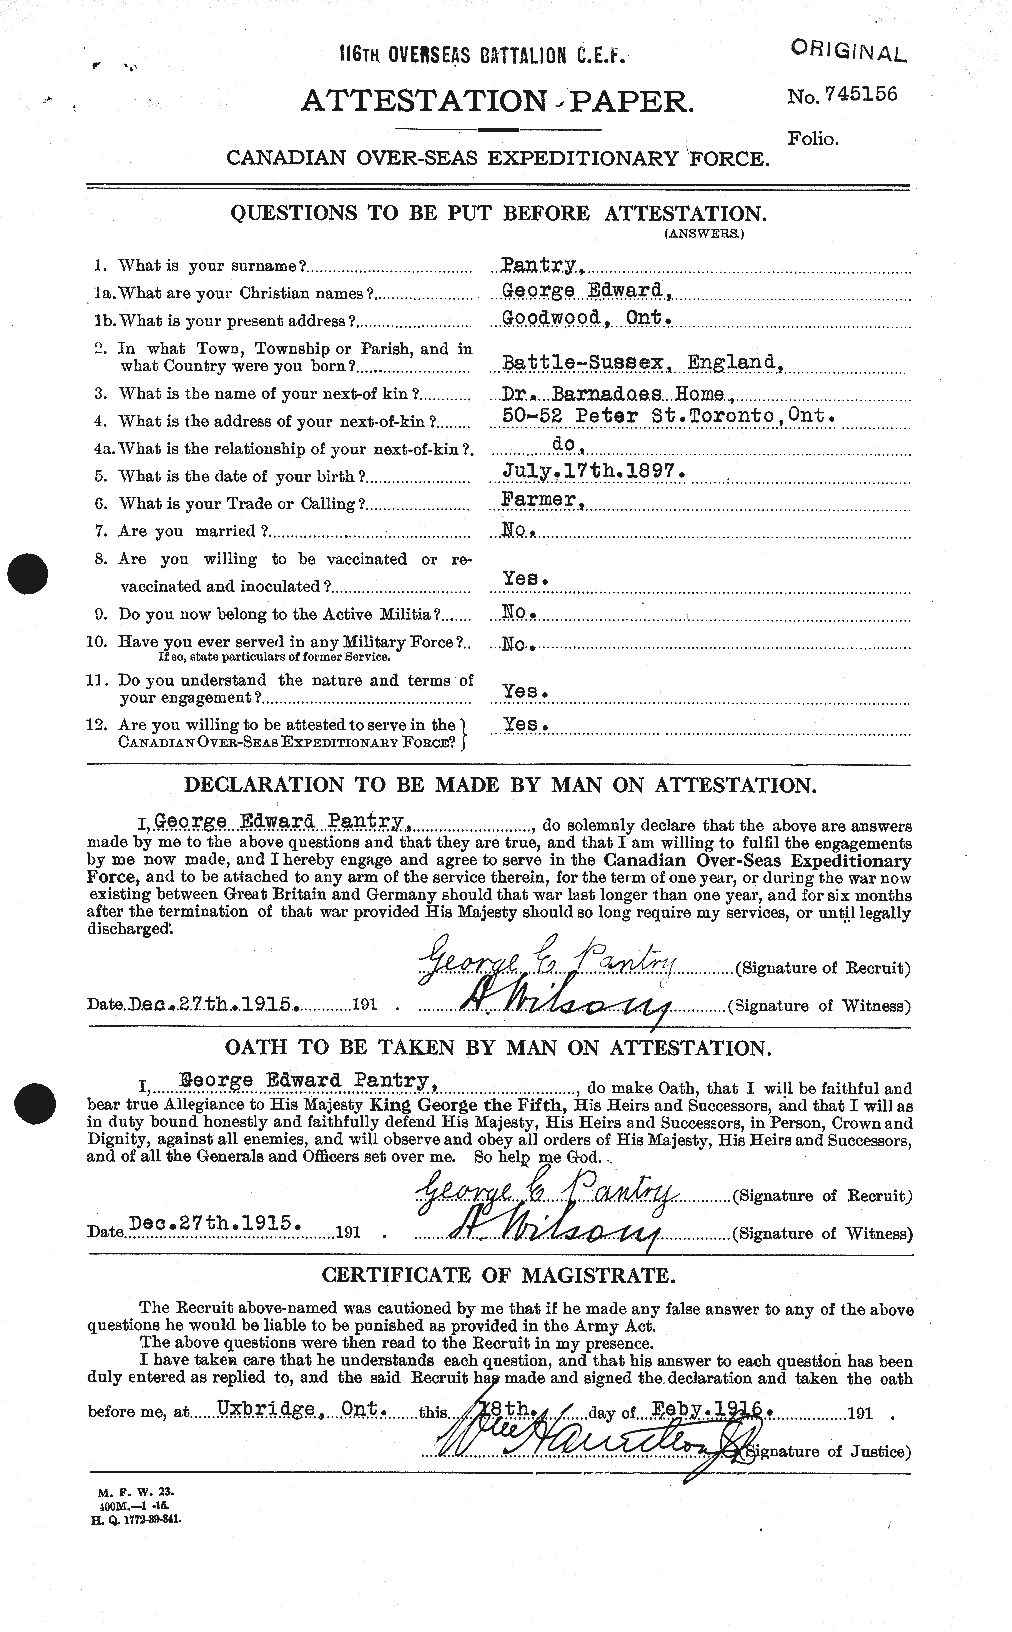 Personnel Records of the First World War - CEF 563455a